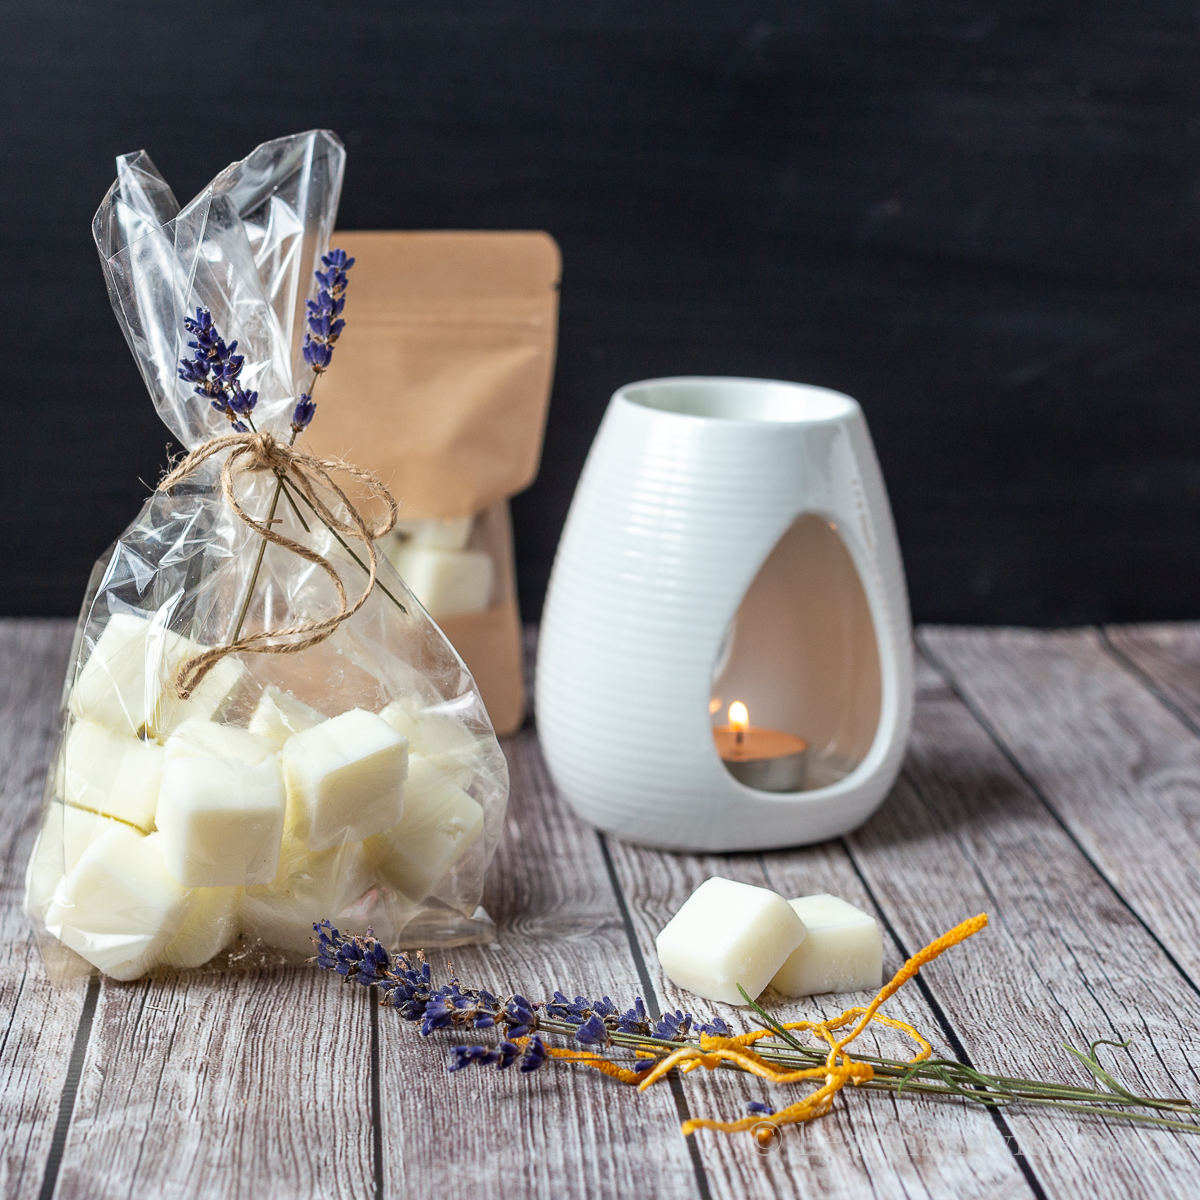 Homemade Wax Melts for Gifts and Your Own Use | Hearth and Vine